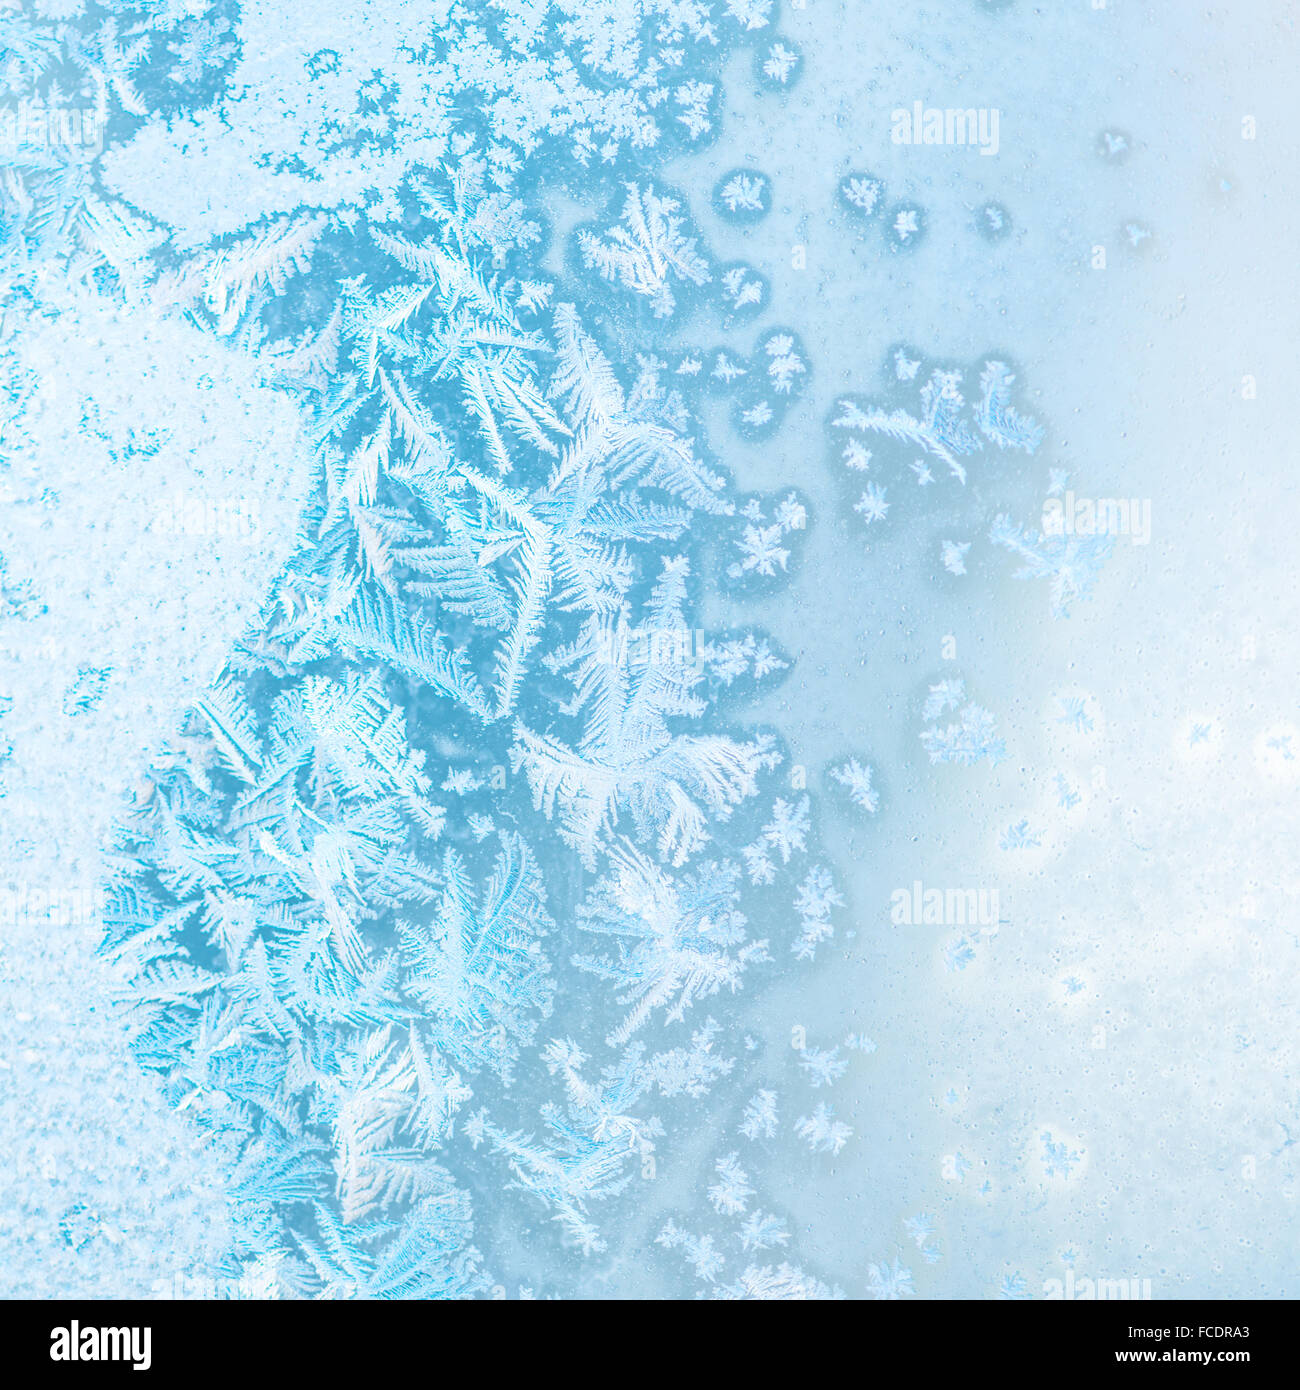 abstract winter ice texture on window, festive background, close up Stock Photo